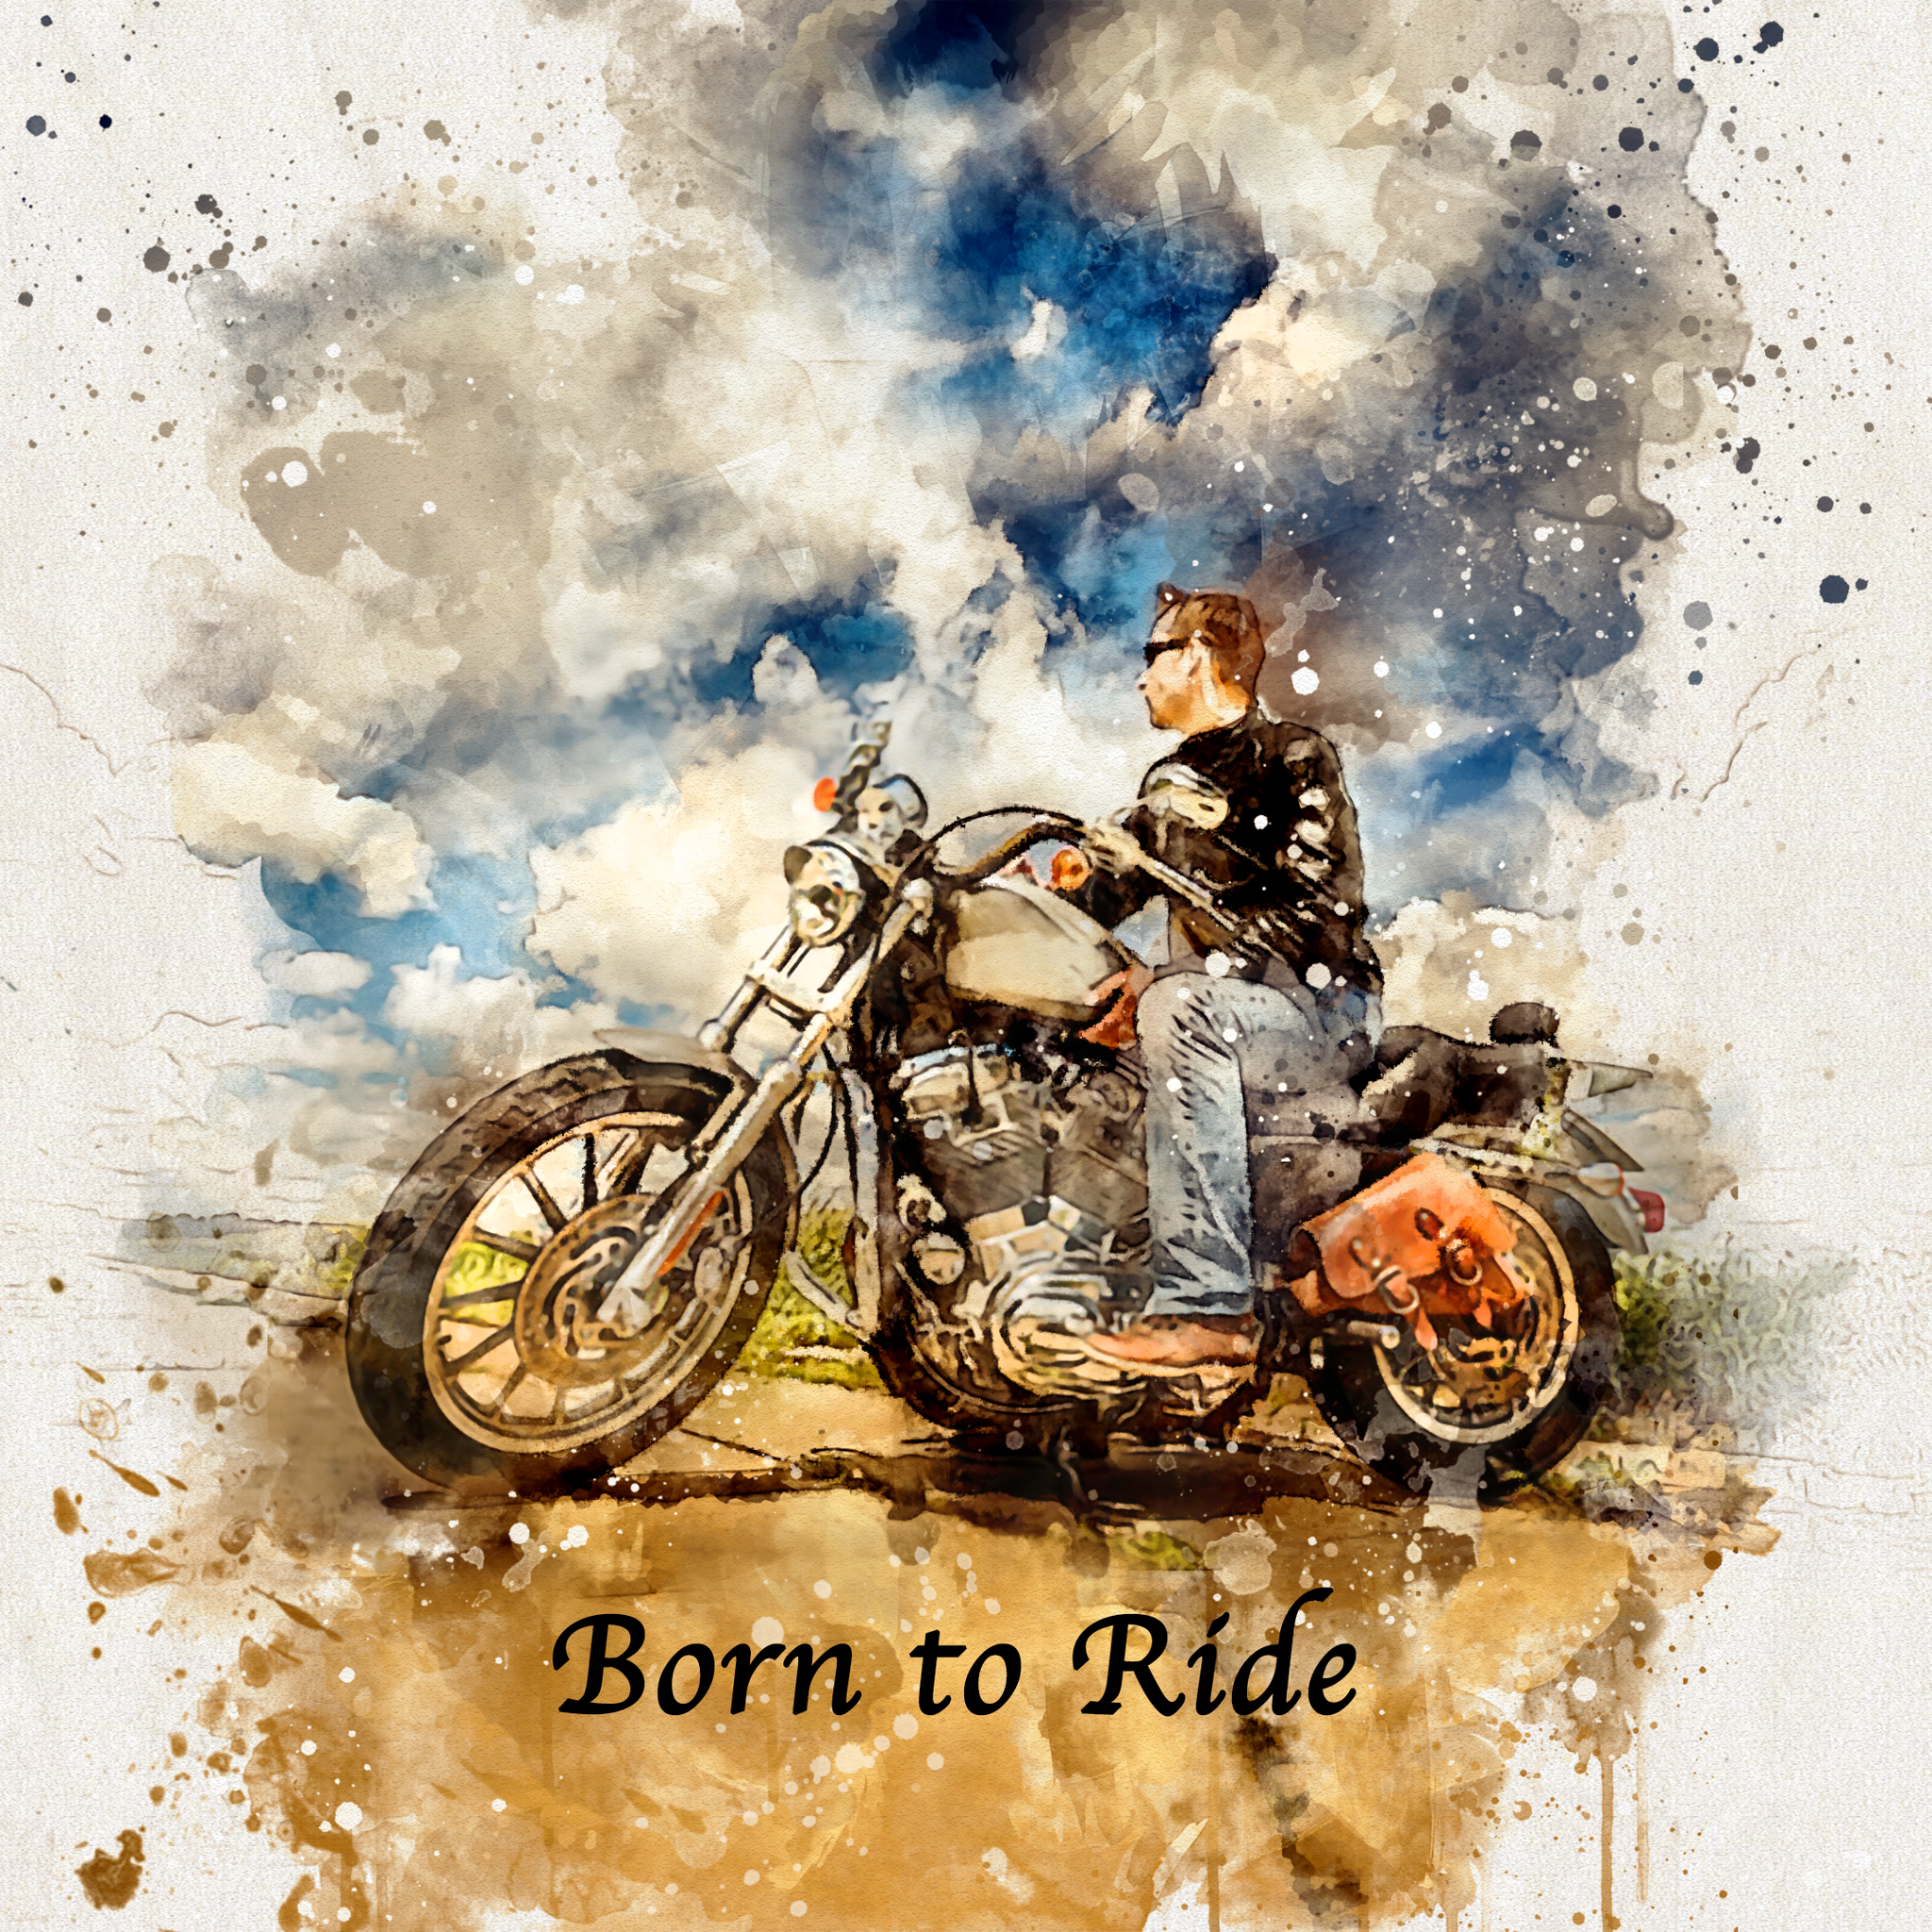 Personalized Gifts for Bikers | Custom Gifts for Motorcycle Lovers | Harley Davidson Riders - FromPicToArt